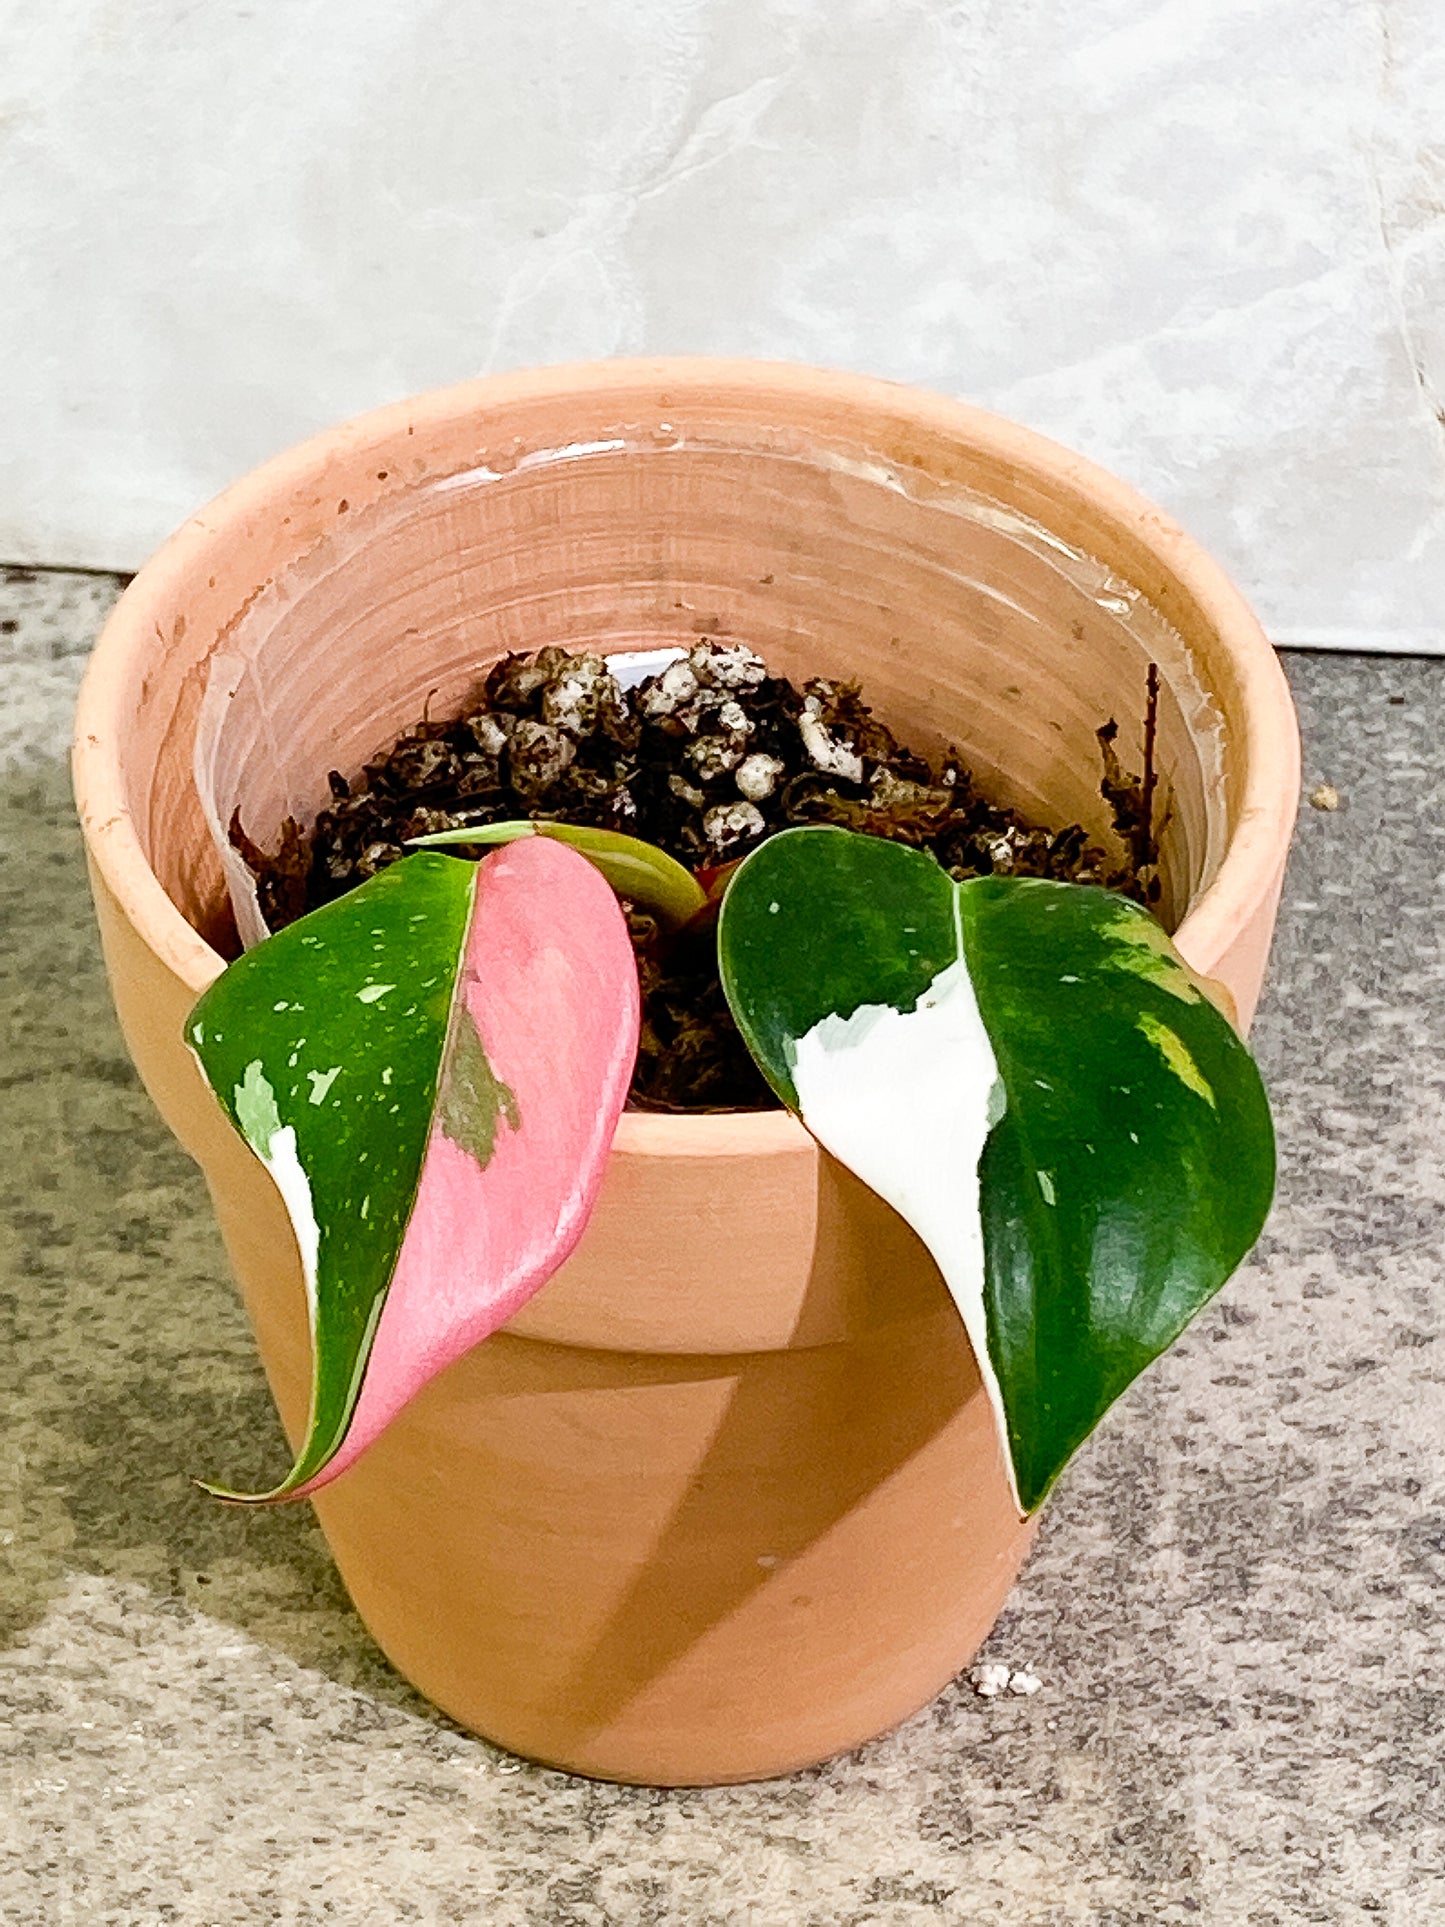 Philodendron white princess tricolor 2 leaves 1 sprout slightly rooted double node